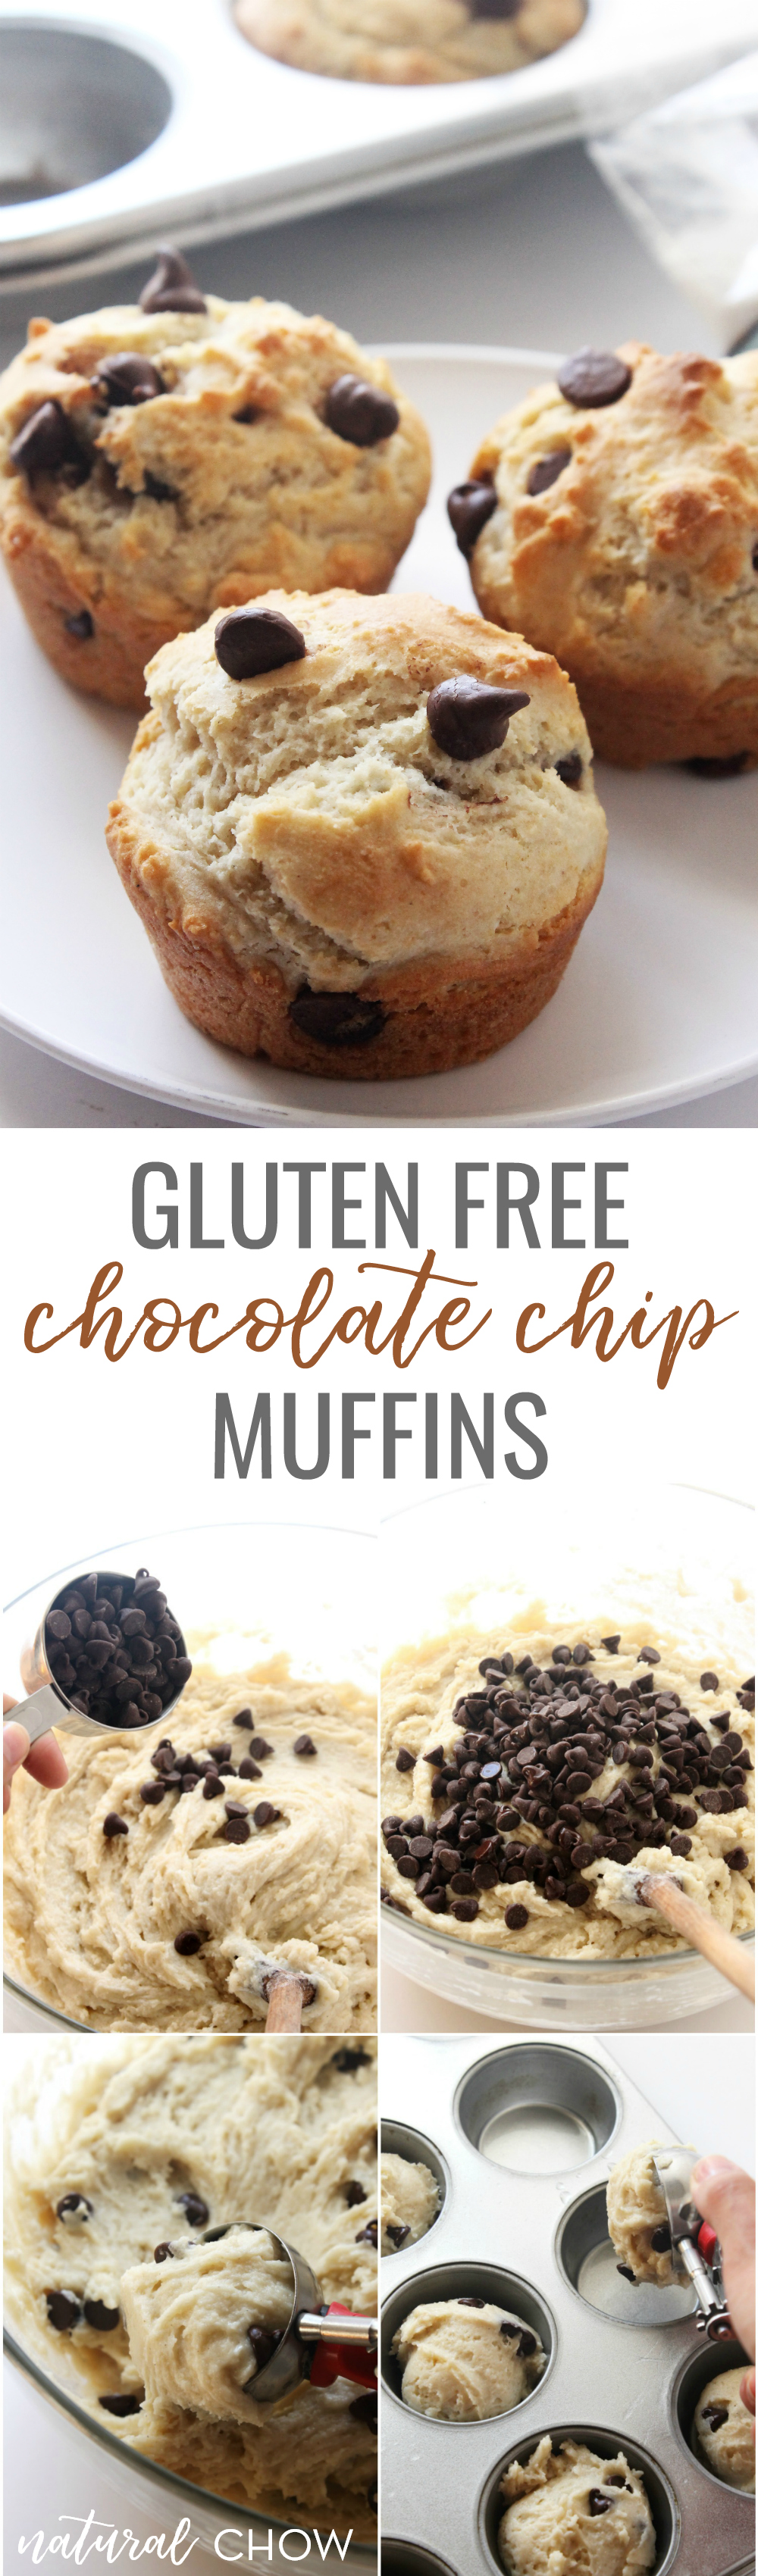 This easy recipe for gluten free chocolate chip muffins using Bob's Red Mill Gluten Free 1-to-1 Baking Flour takes only 30 minutes to make—start to finish.